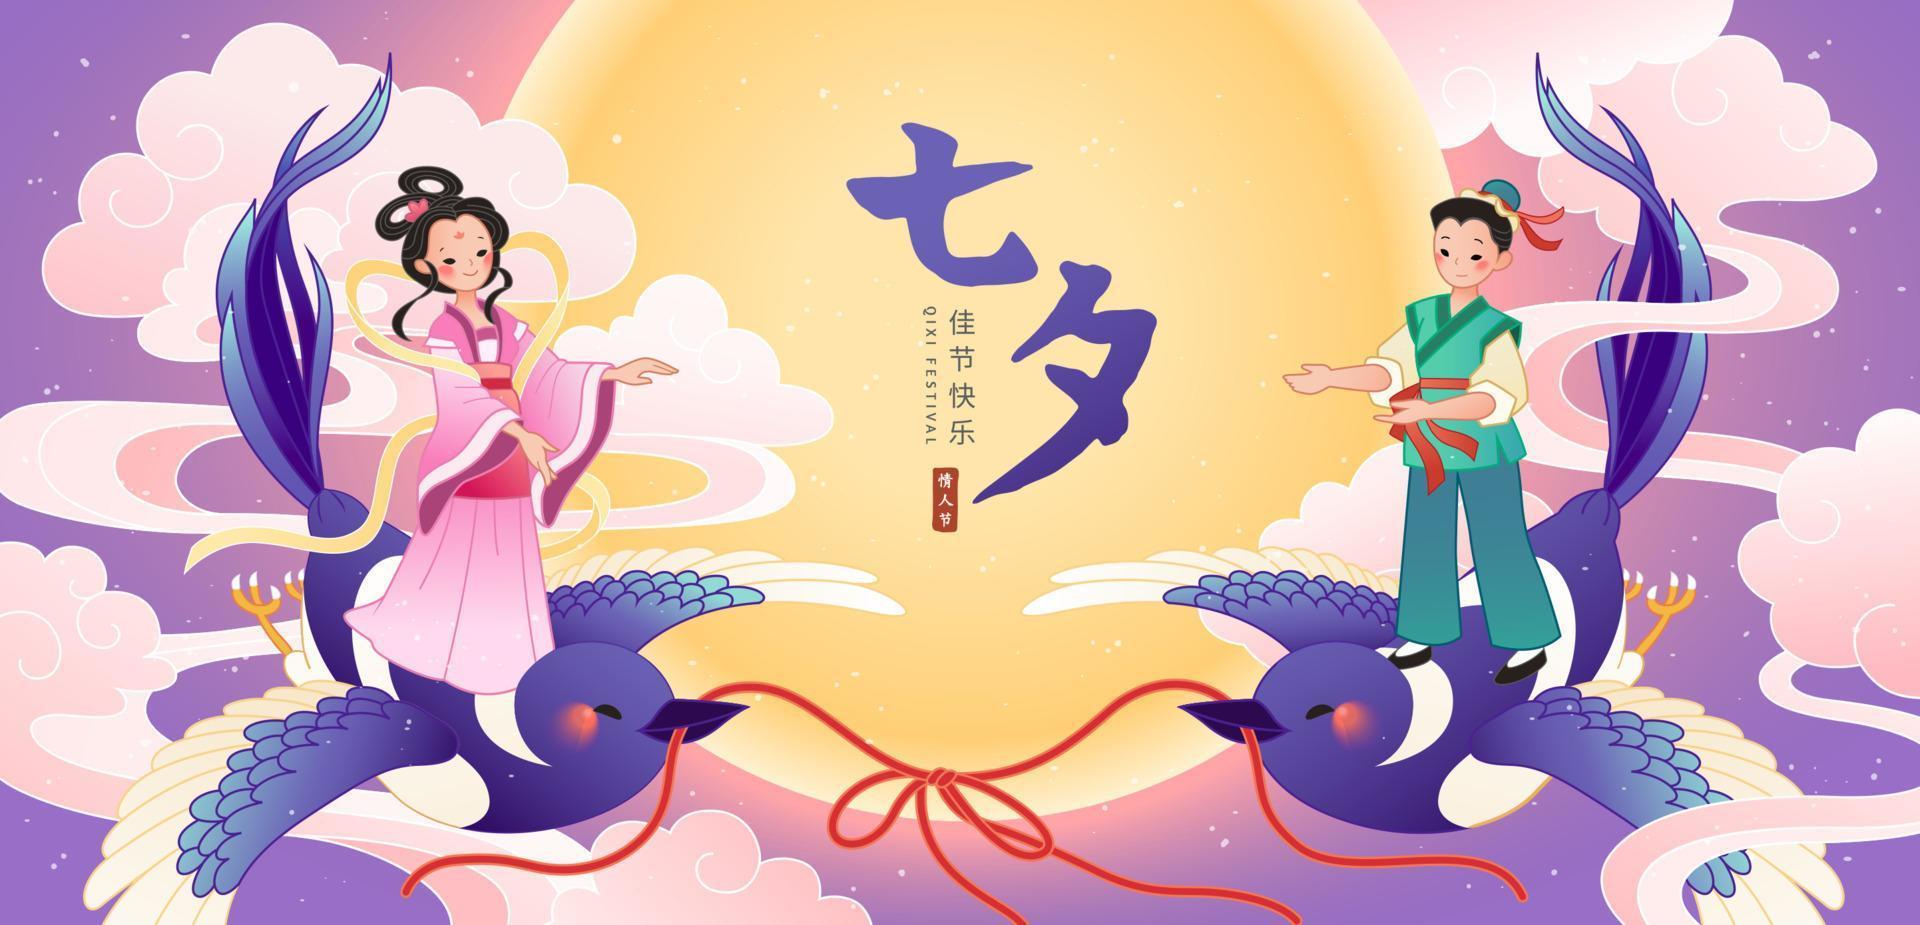 Qixi festival banner in flat style. Illustration of couple in traditional Chinese costumes standing on birds flying in cloudy sky with Chinese calligraphy on moon. Translation, Chinese Valentines day vector